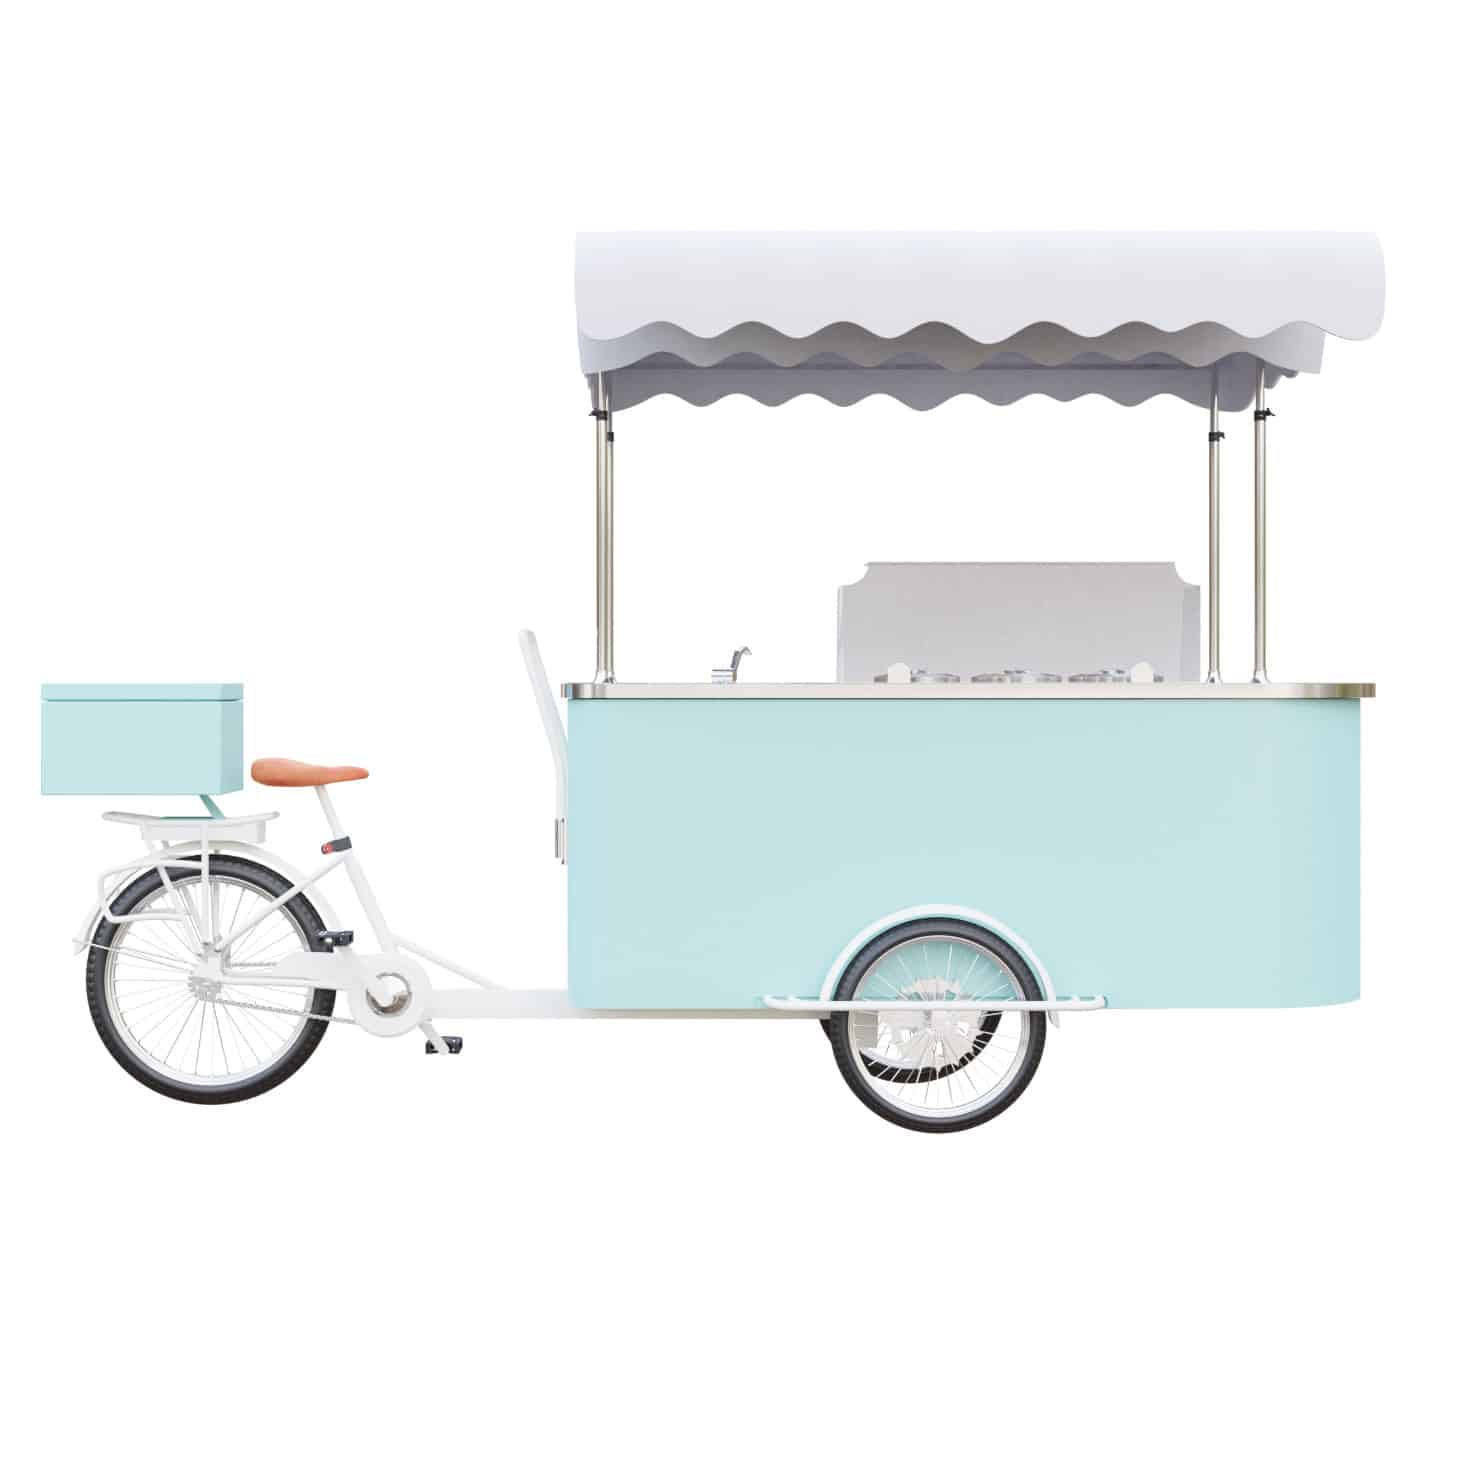 food-bike-ice-cream-6-flavours-rounded-side-view-customer